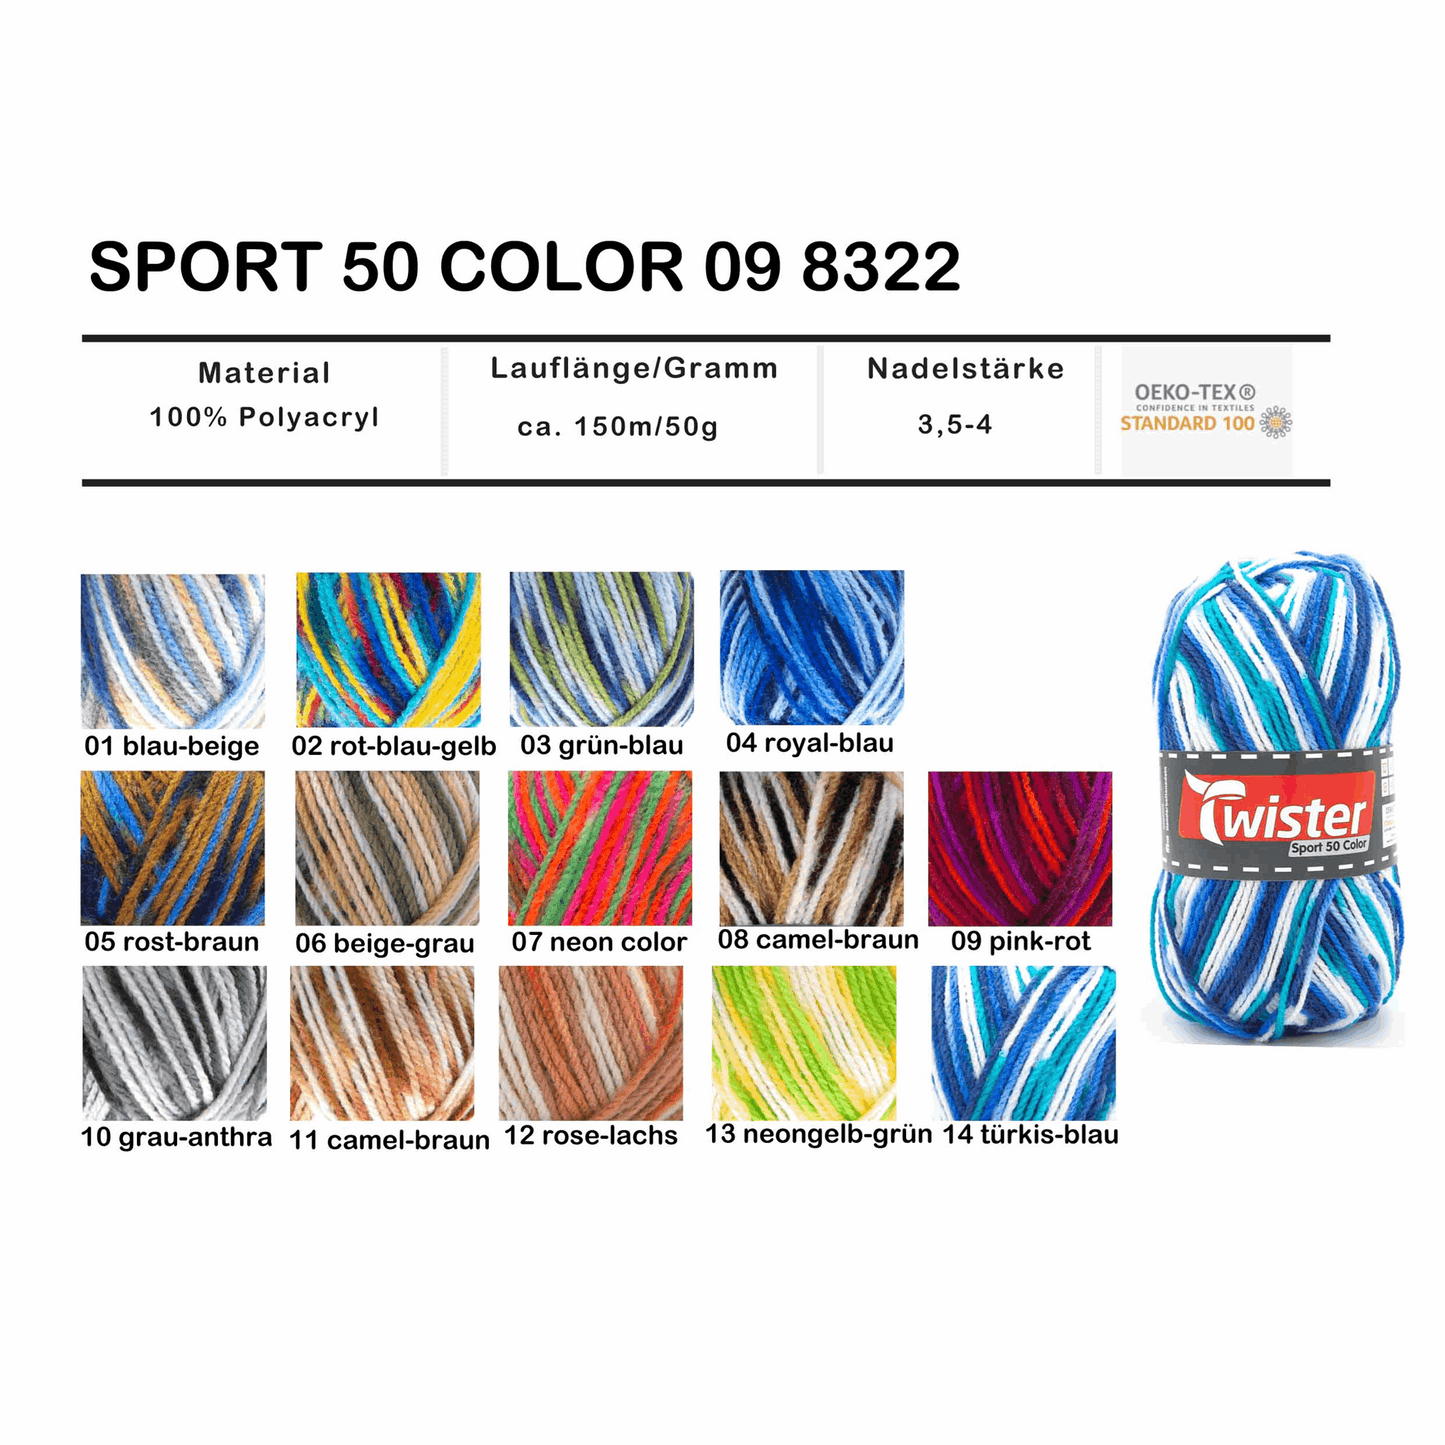 Twister Sport 50, color, 98322, Farbe pink/rot 9